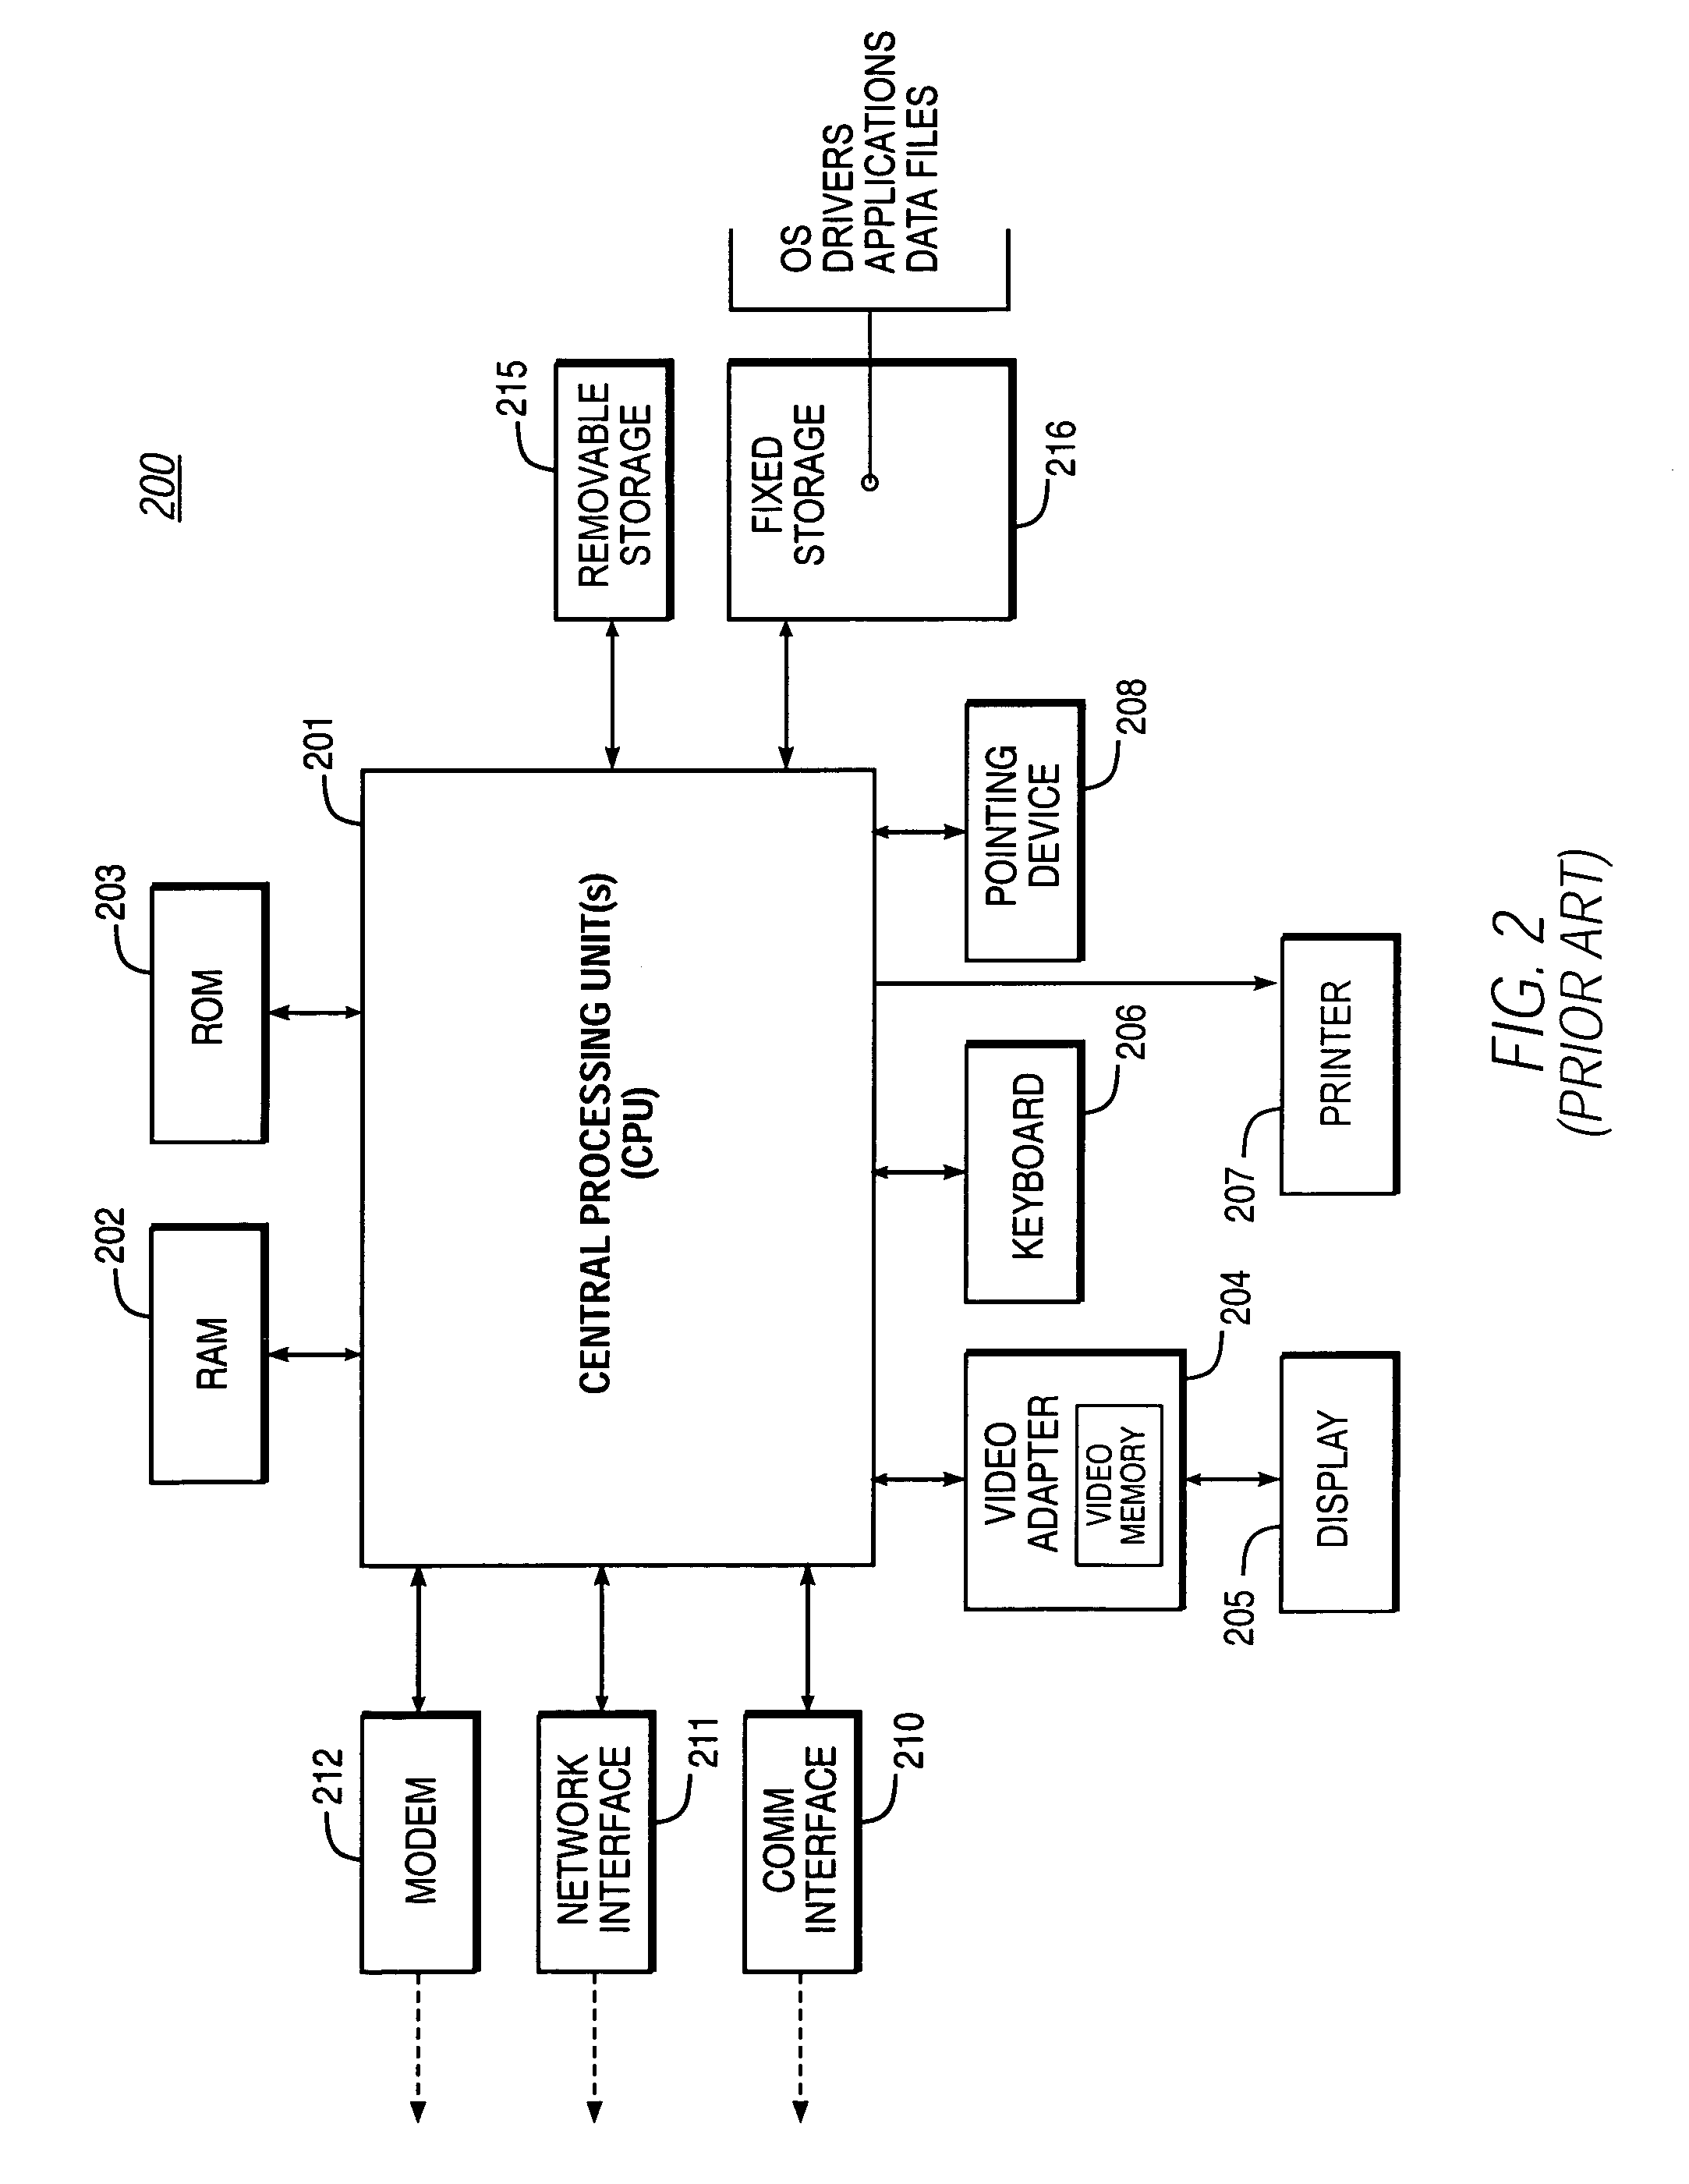 Electronic mail system with authentication/encryption methodology for allowing connections to/from a message transfer agent